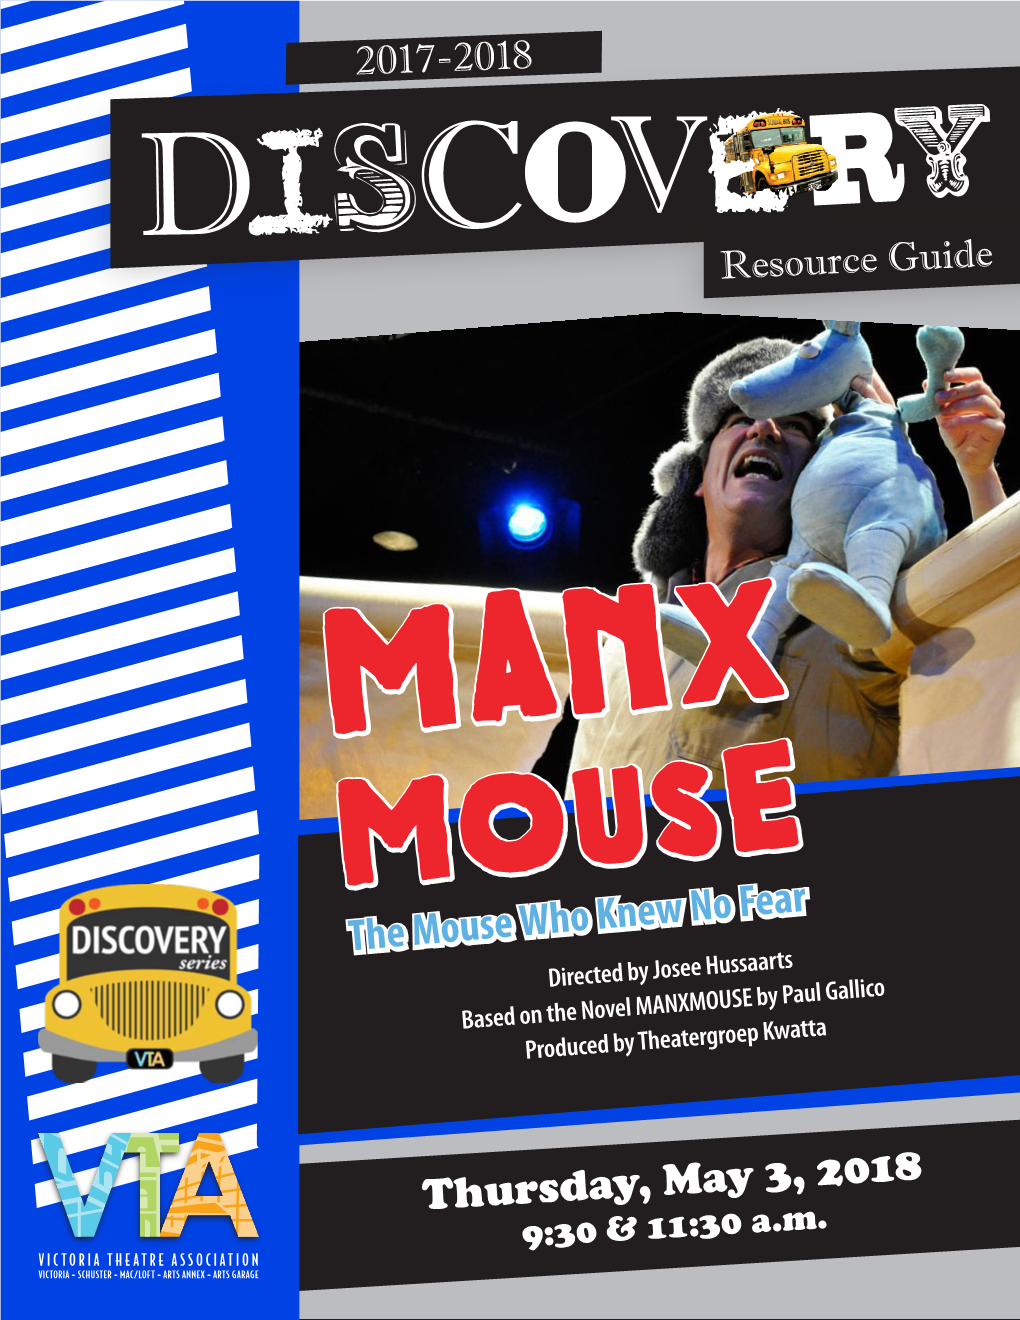 MANXMOUSE by Paul Gallico Produced by Theatergroep Kwatta